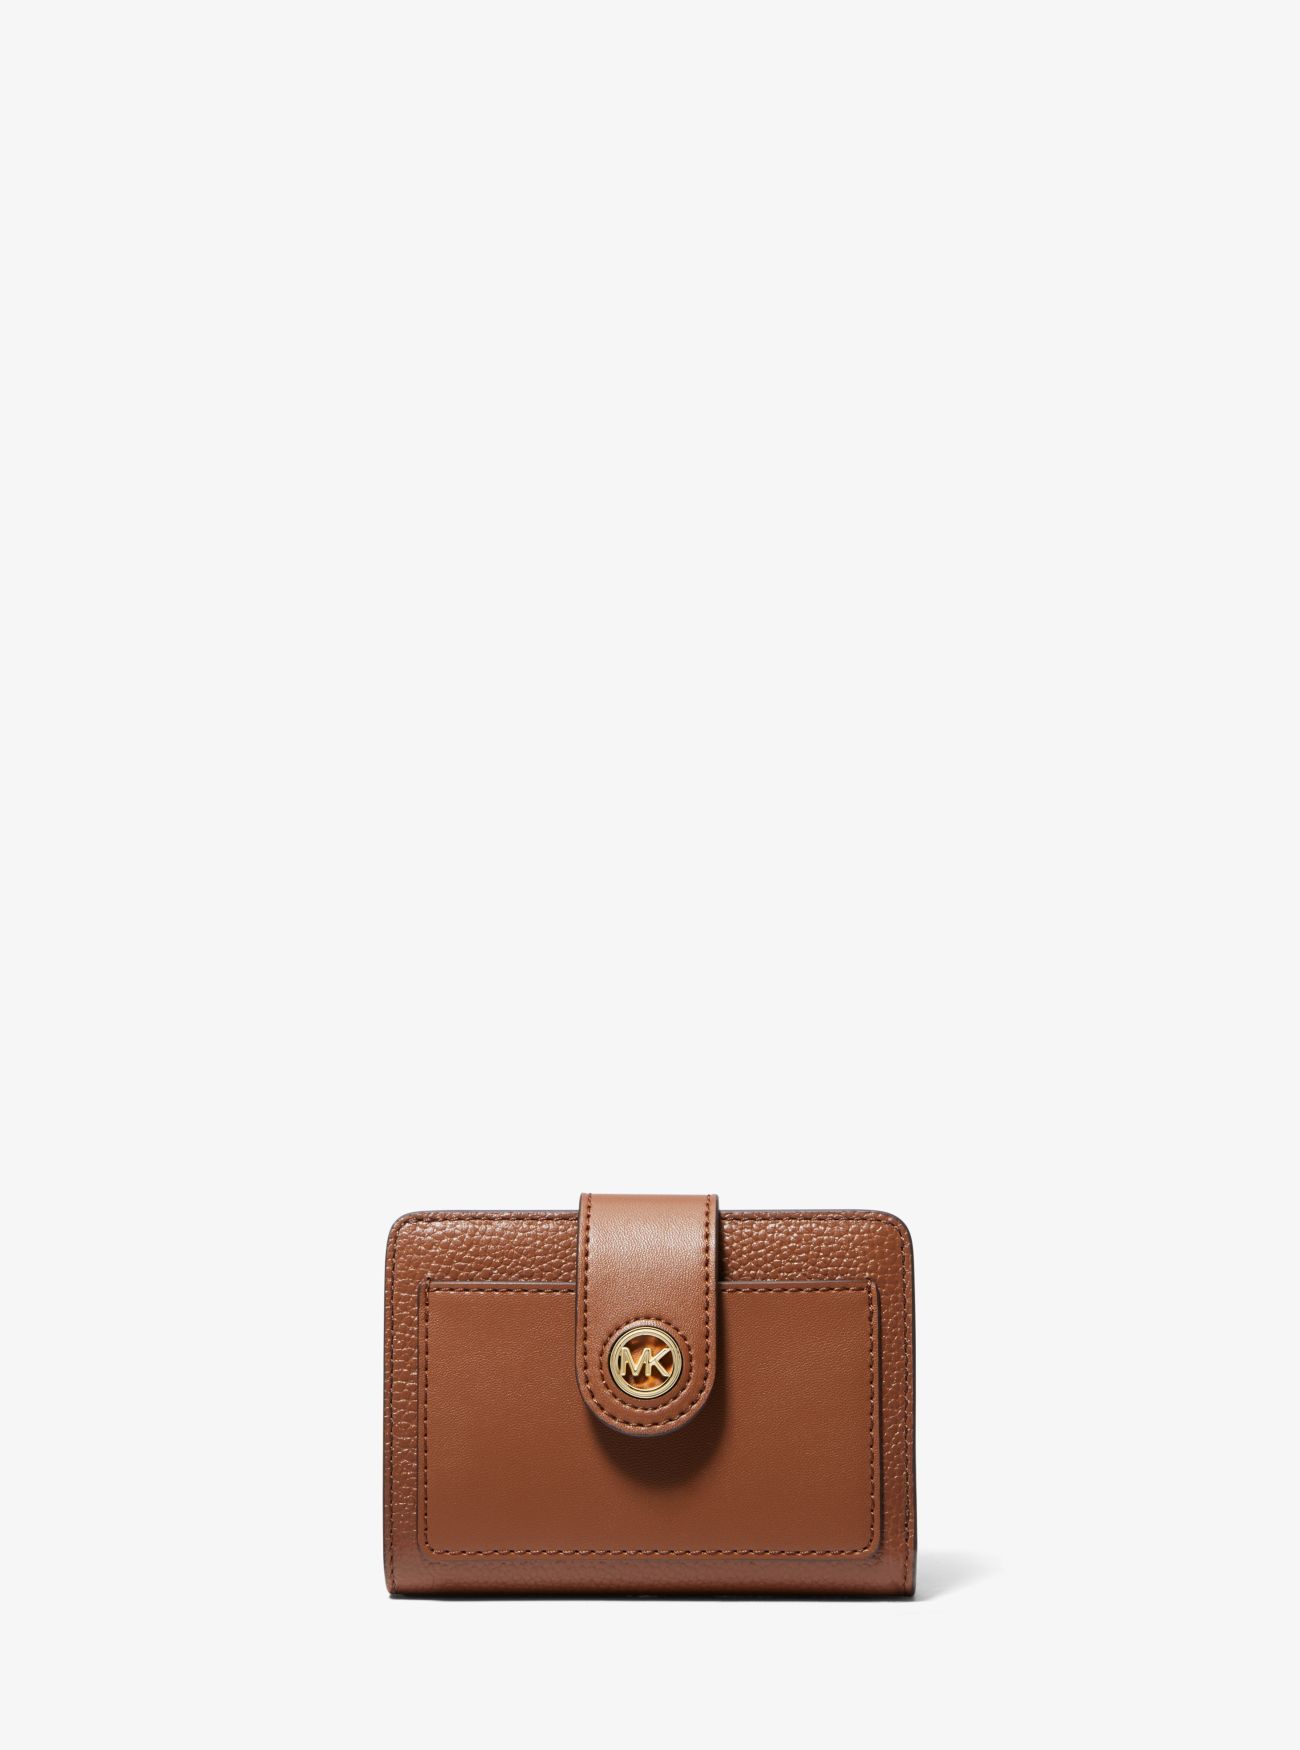 MK Small Leather Wallet - Brown - Michael Kors